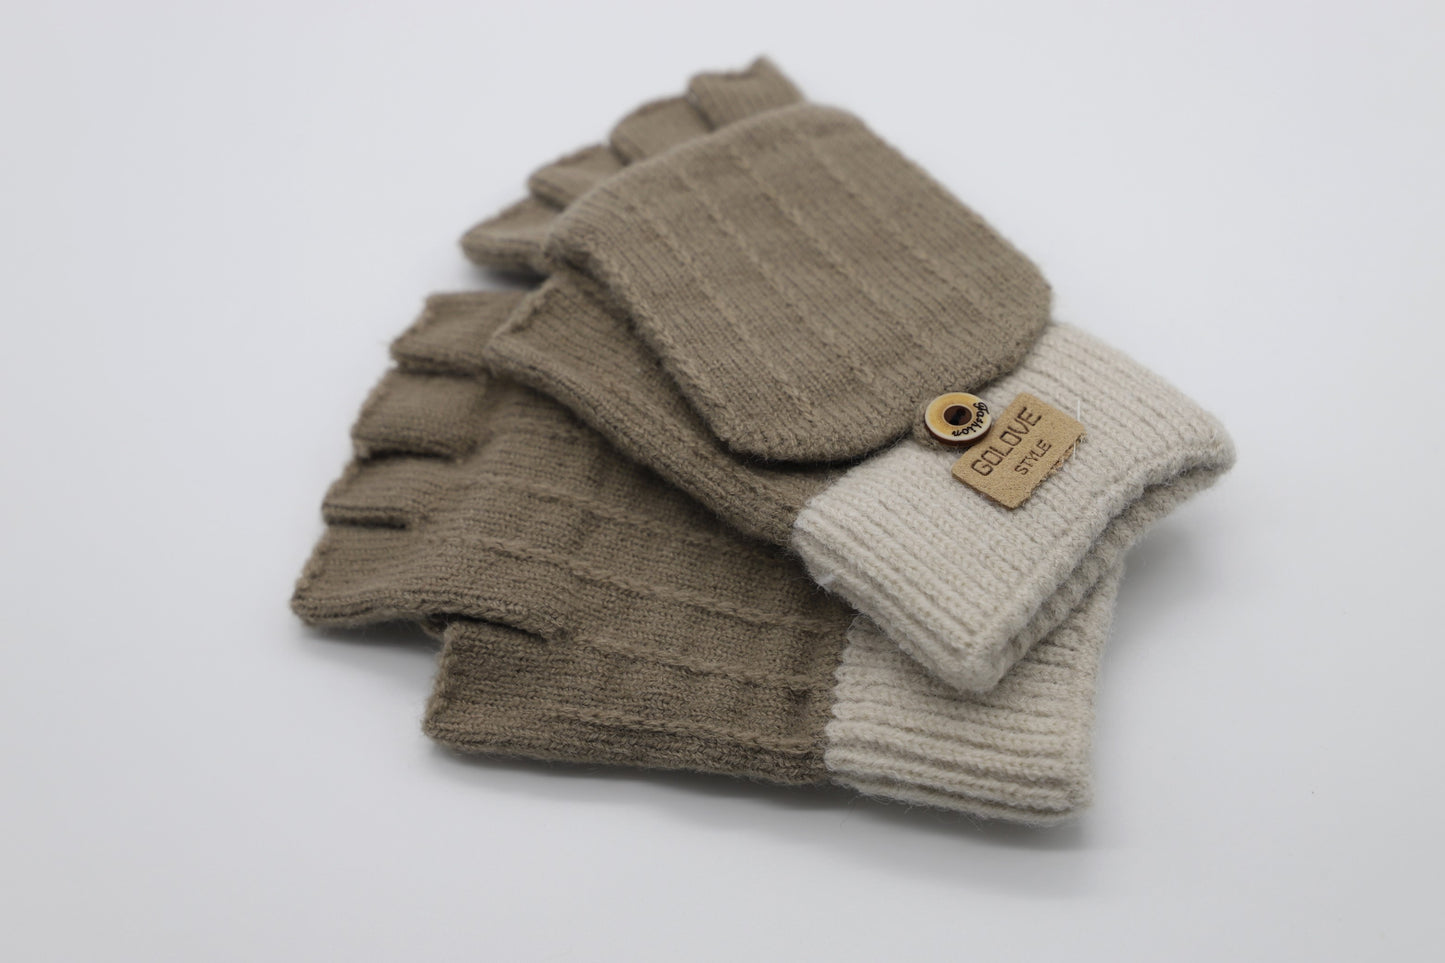 These flip-top gloves are finest gloves from Villanelle in caramel beige. A comfortable and useful accessory for women made from the softest wool blend for extreme comfort and warmth. The opening and closing cover gives you flexibility to grab things easily and the closing cover will keep you warm on cold, winter, autumn, spring days. This product is sourced and manufactured in Poland.